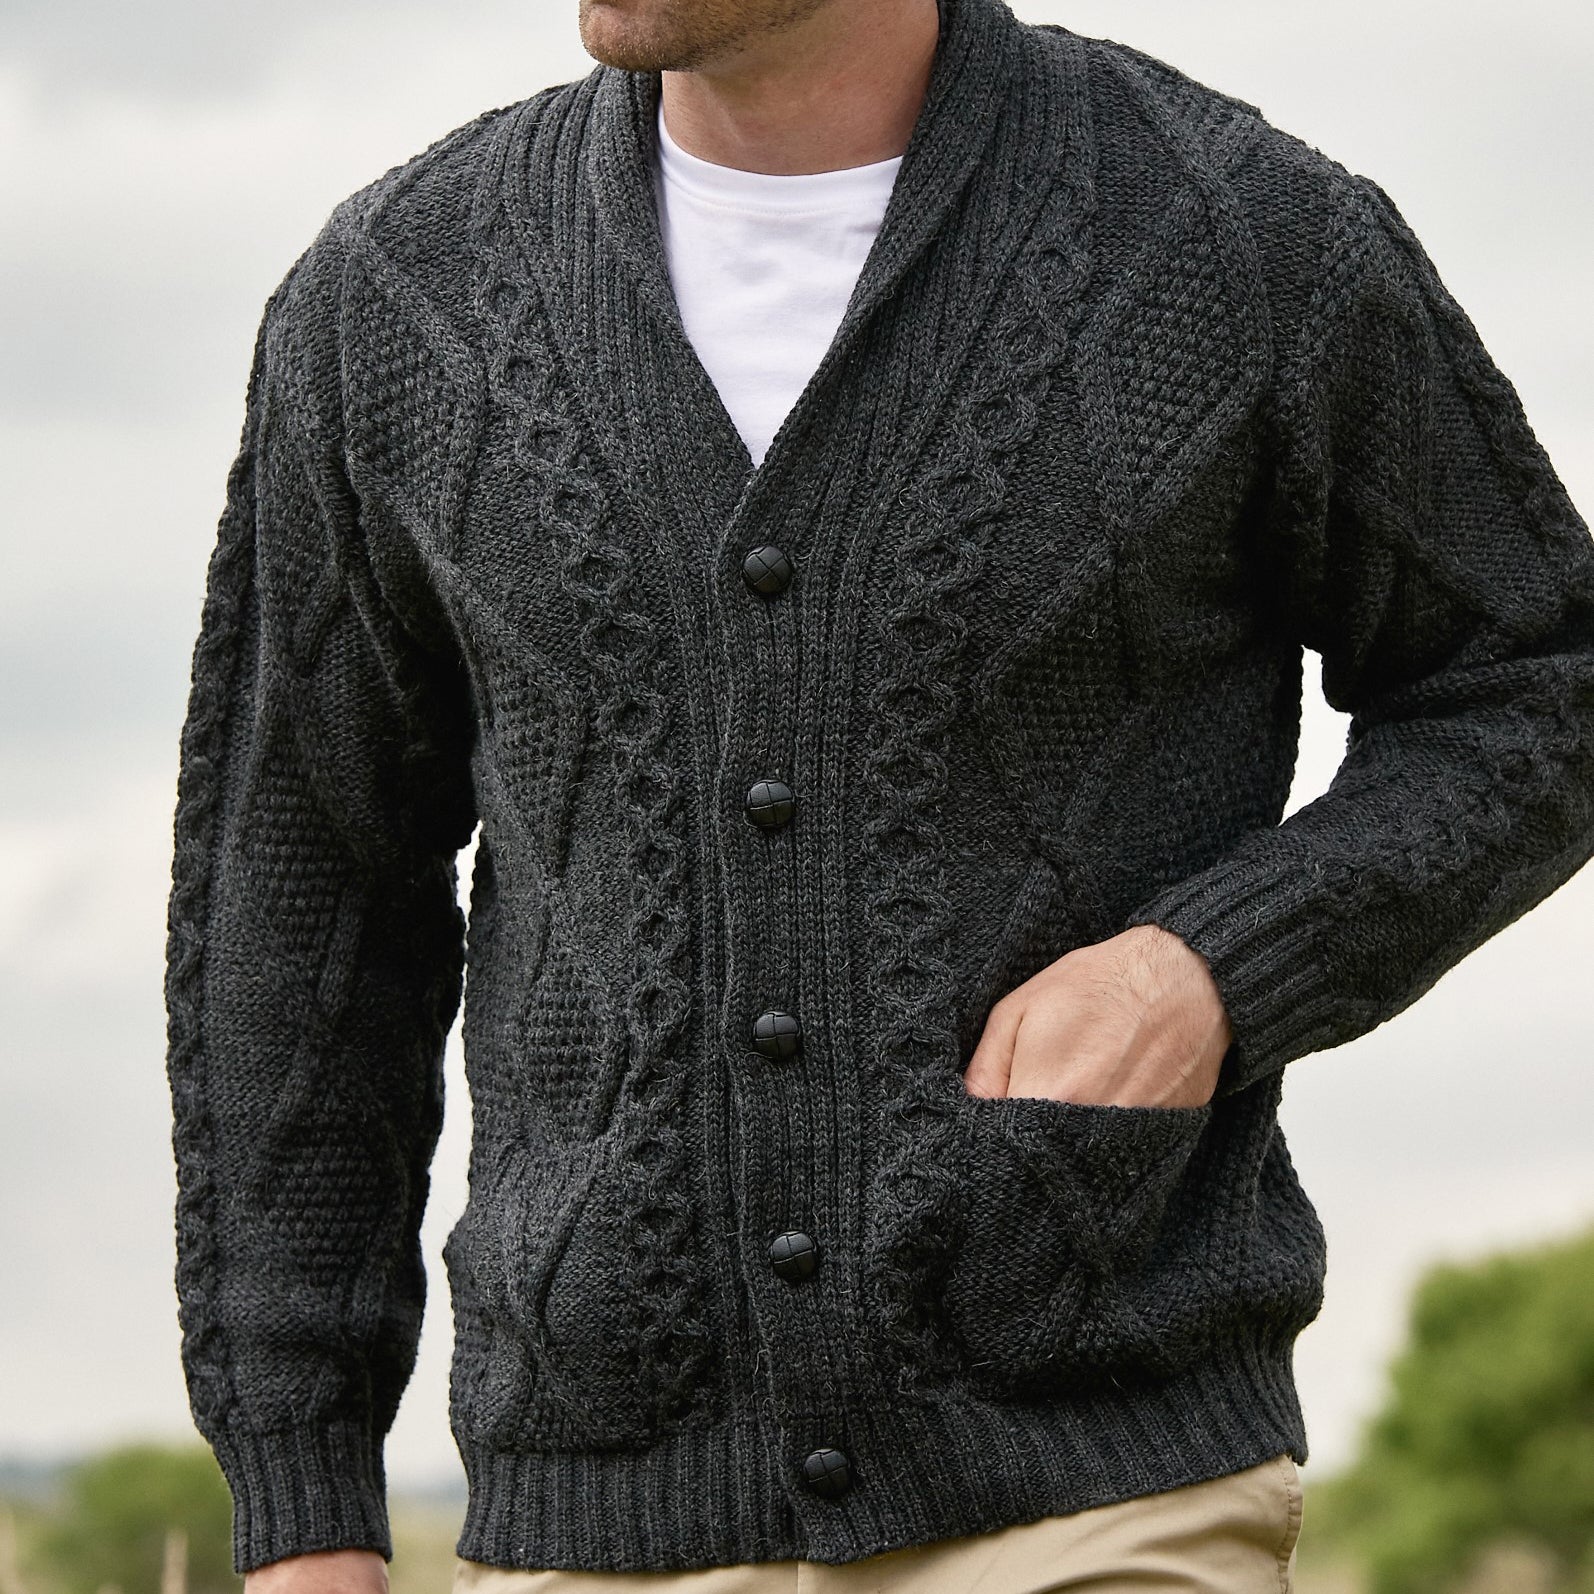 West End Kerry Aran Button Cardigan Sweater in Charcoal